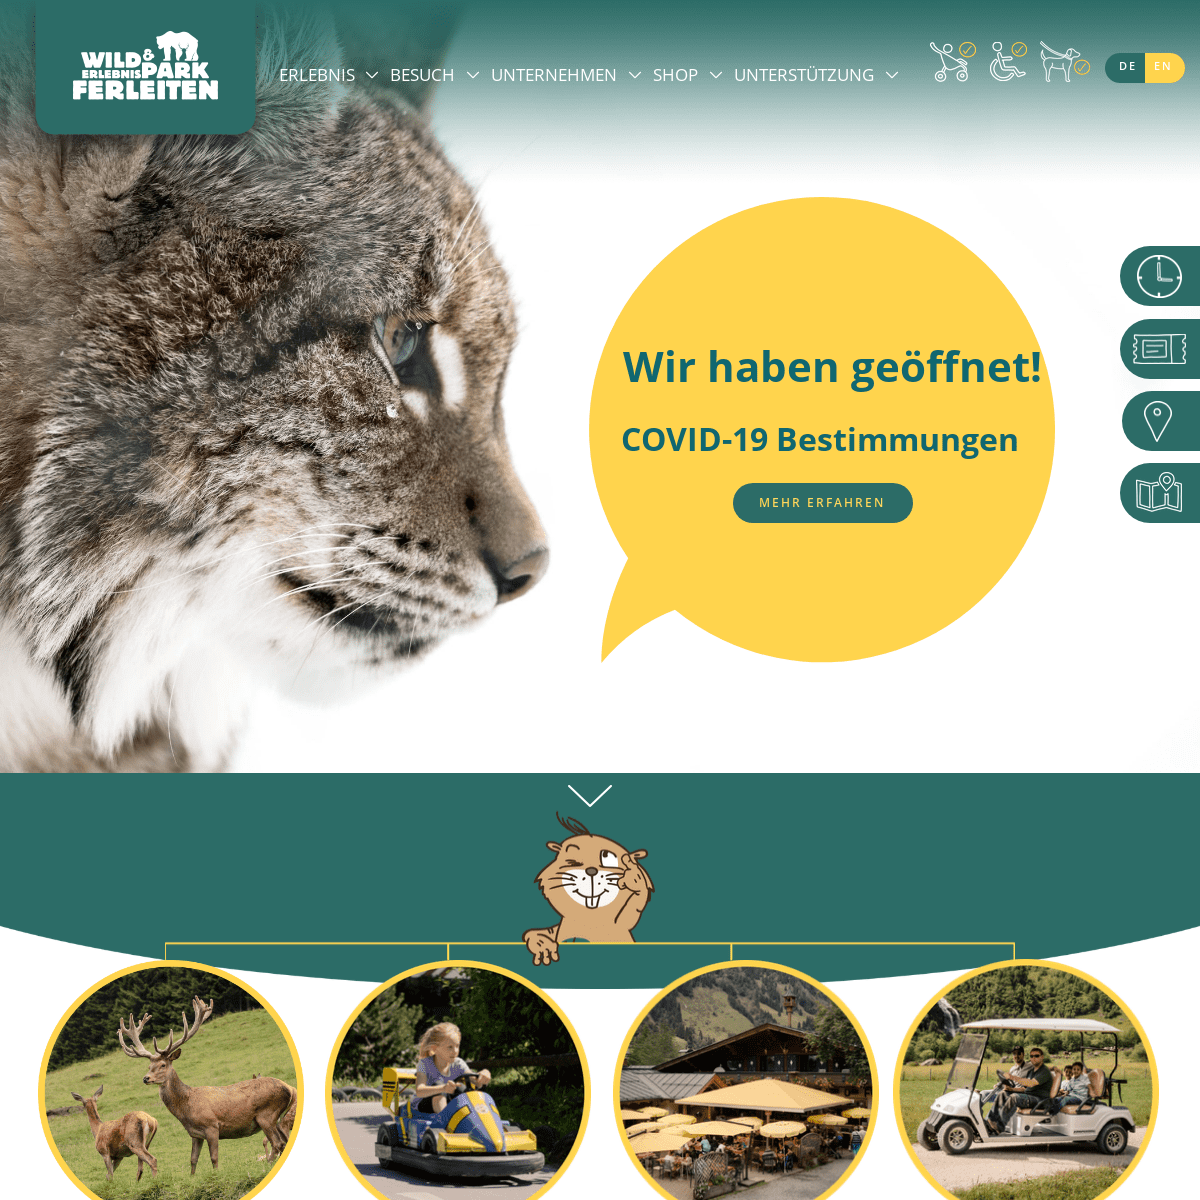 A complete backup of https://wildpark-ferleiten.at